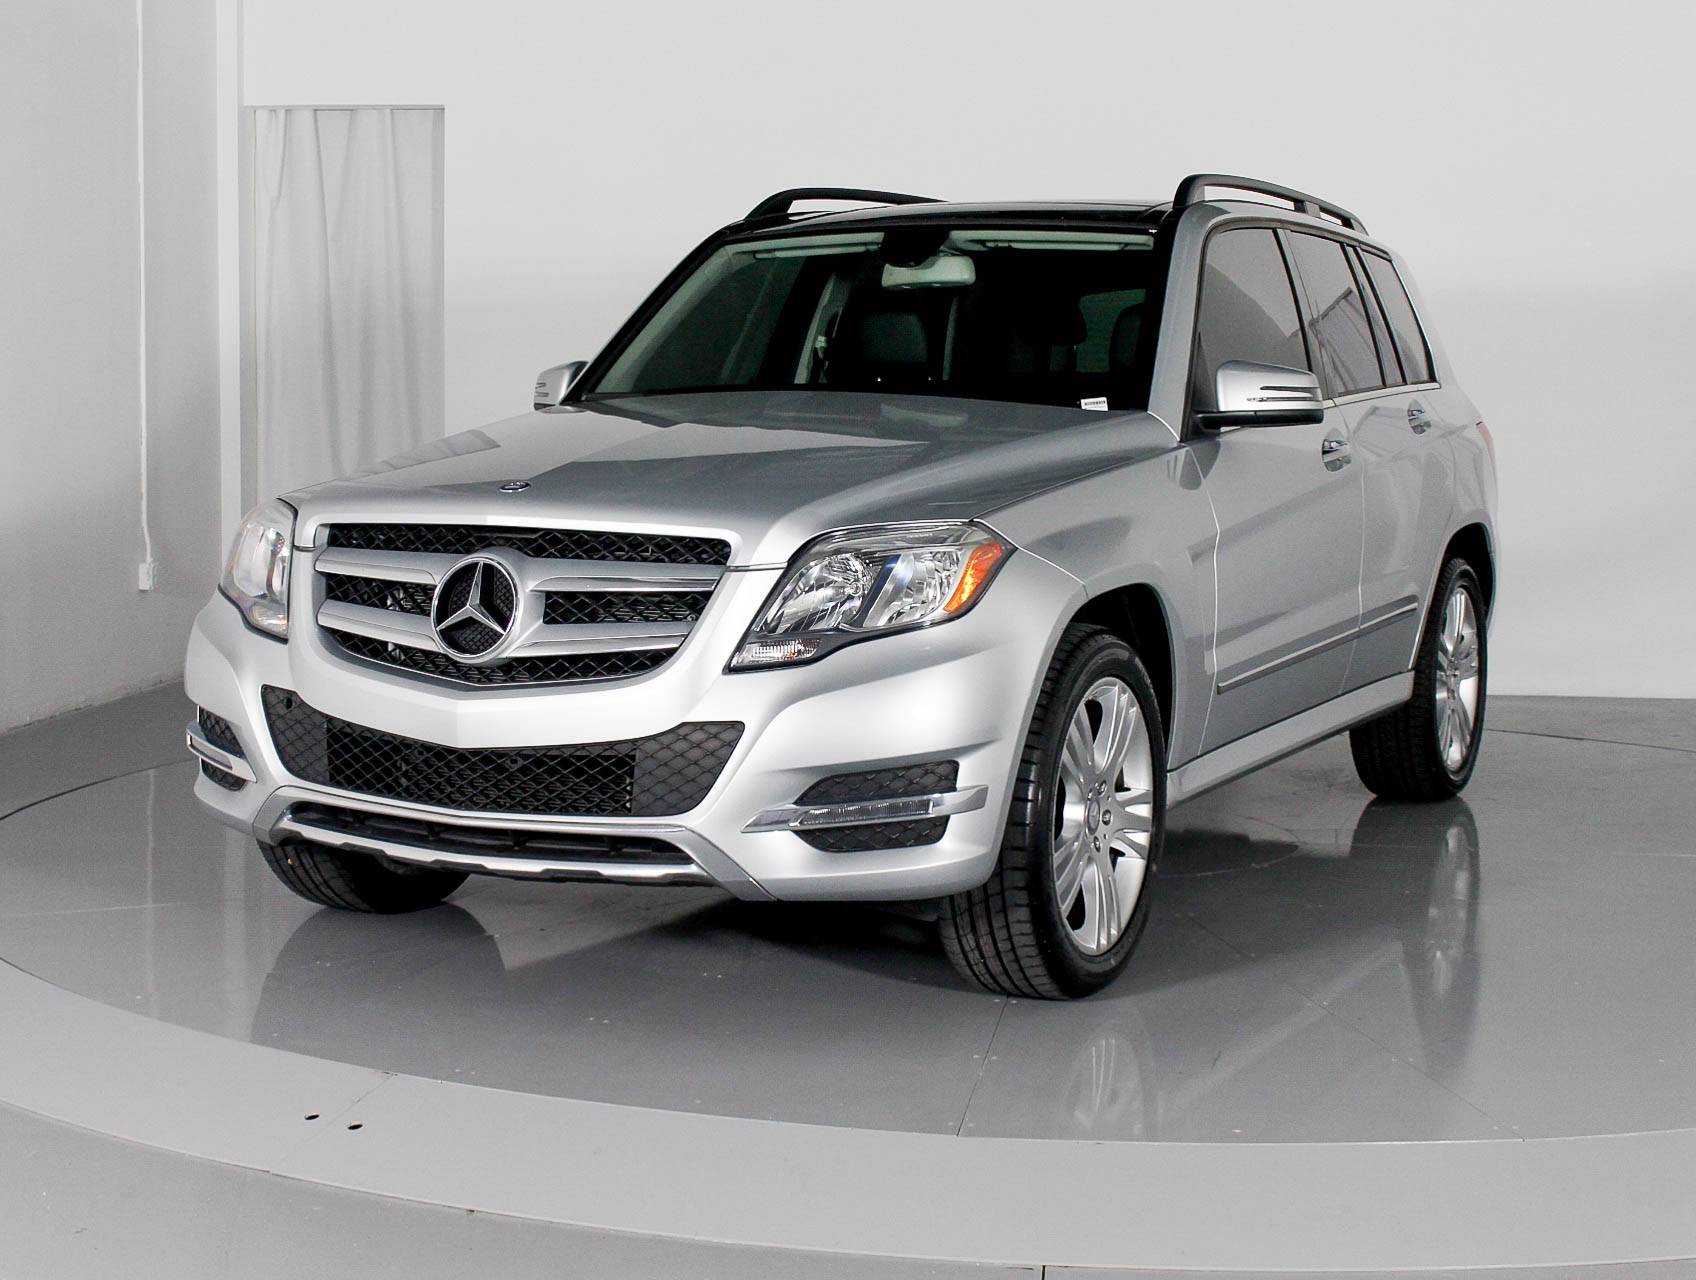 Used 2015 MERCEDES-BENZ GLK CLASS GLK350 for sale in WEST PALM | 100450